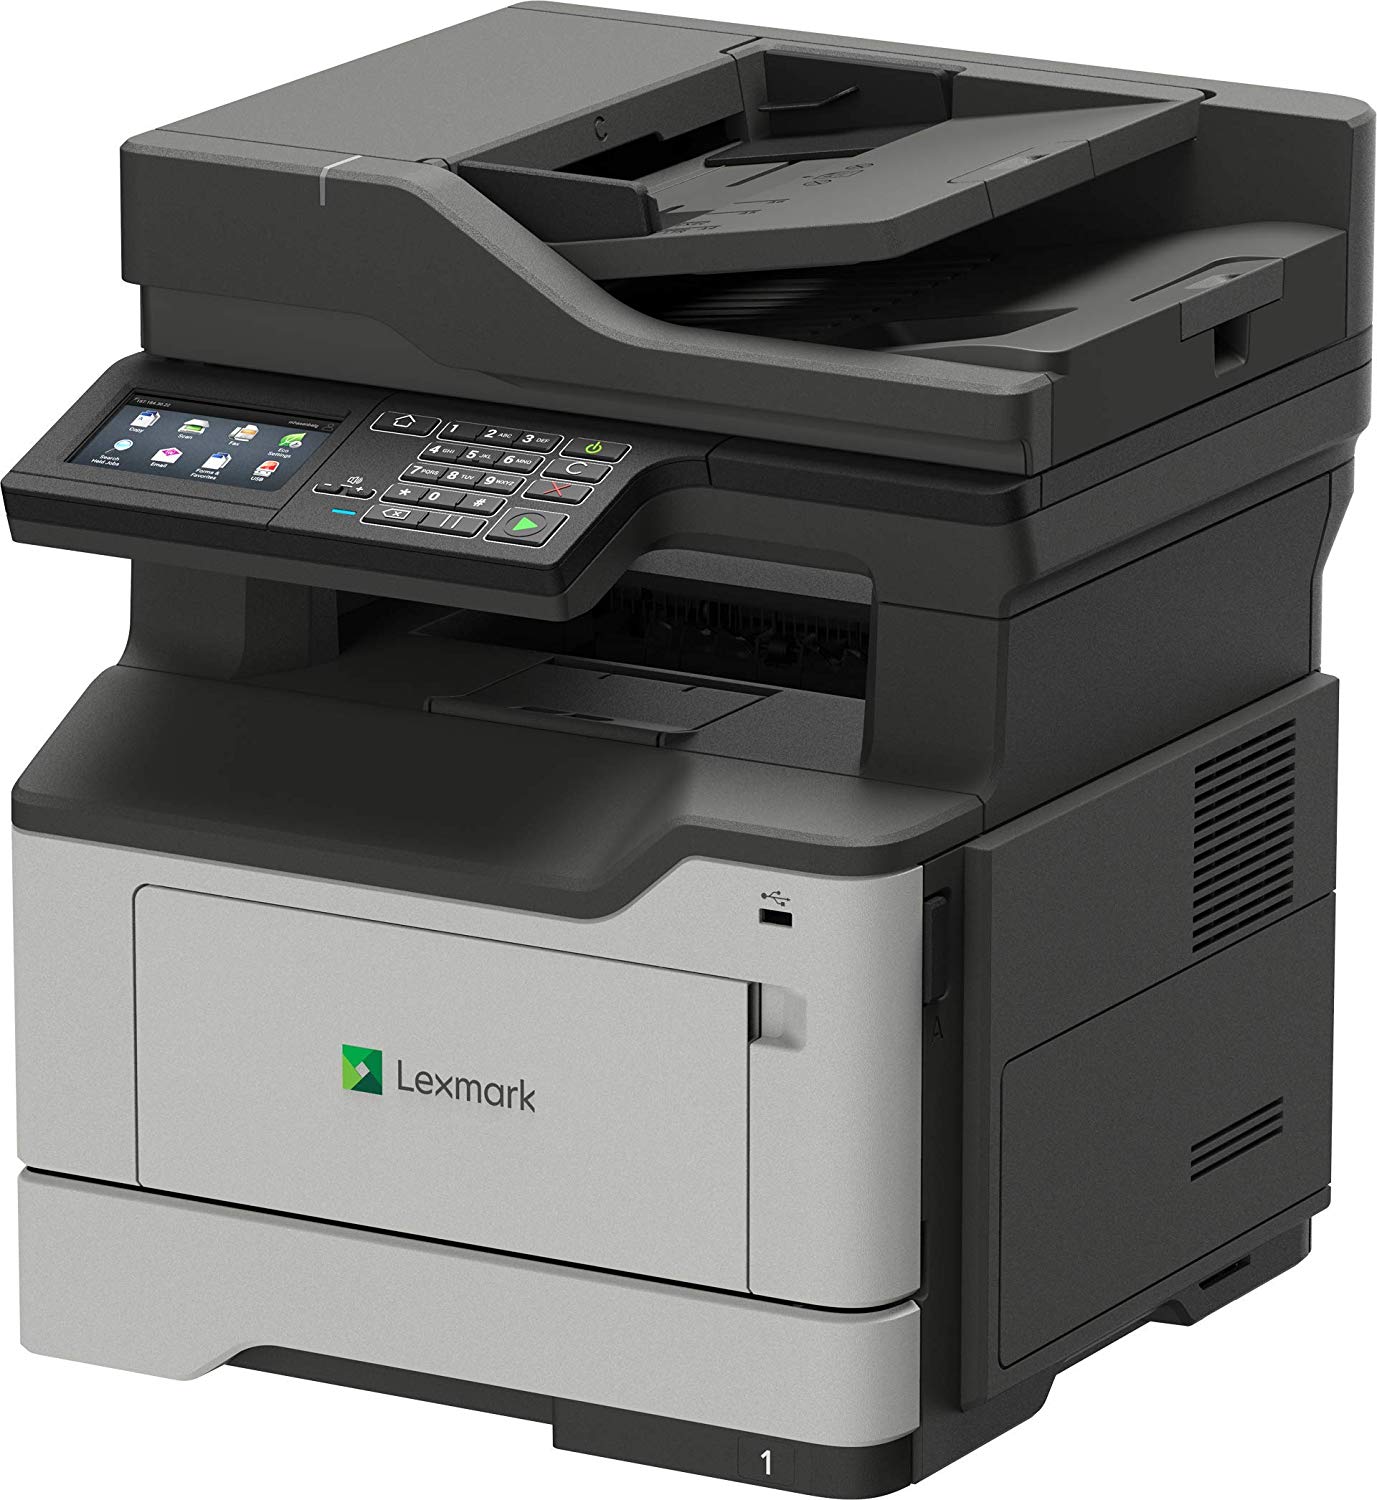 Top 8 Best High Speed Laser Printers in 2022 - Reviews and Comparison